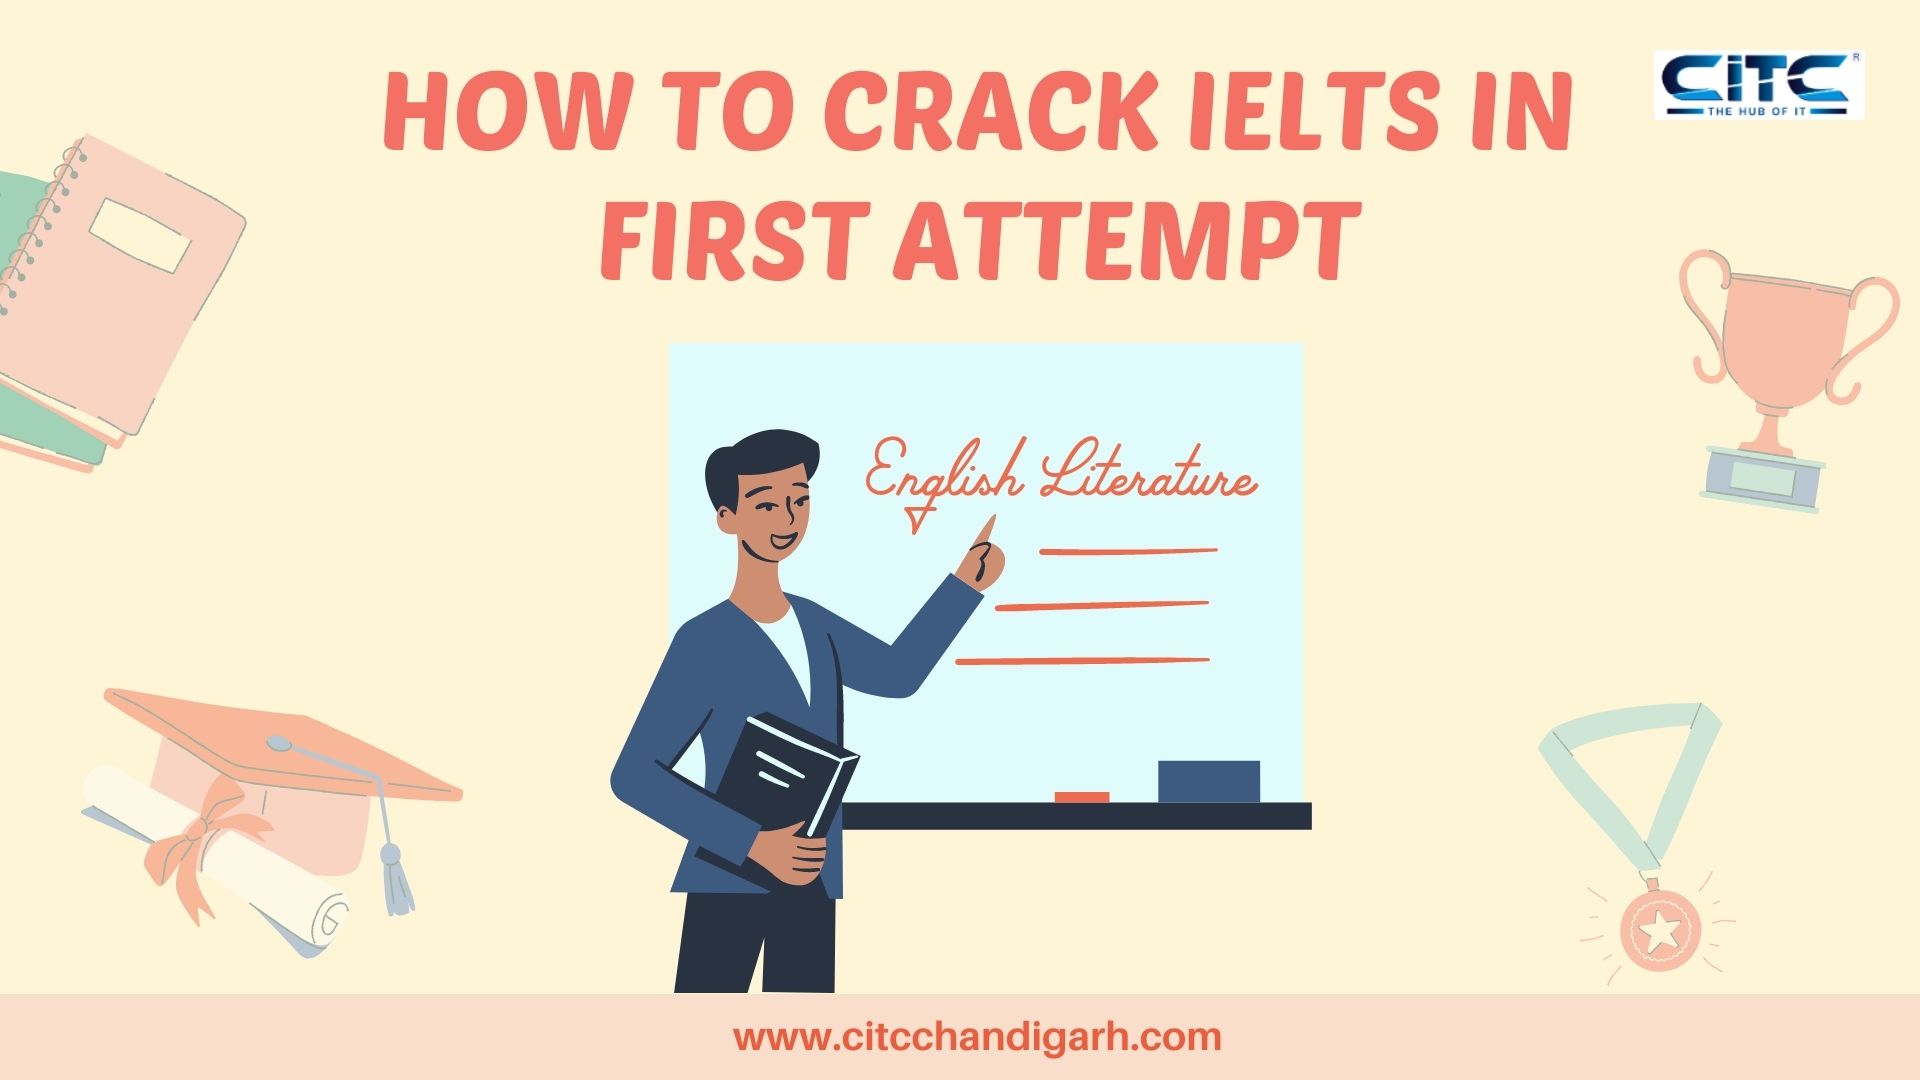 HOW TO CRACK IELTS : TIPS & TRICKS TO CRACK IELTS IN FIRST ATTEMPT